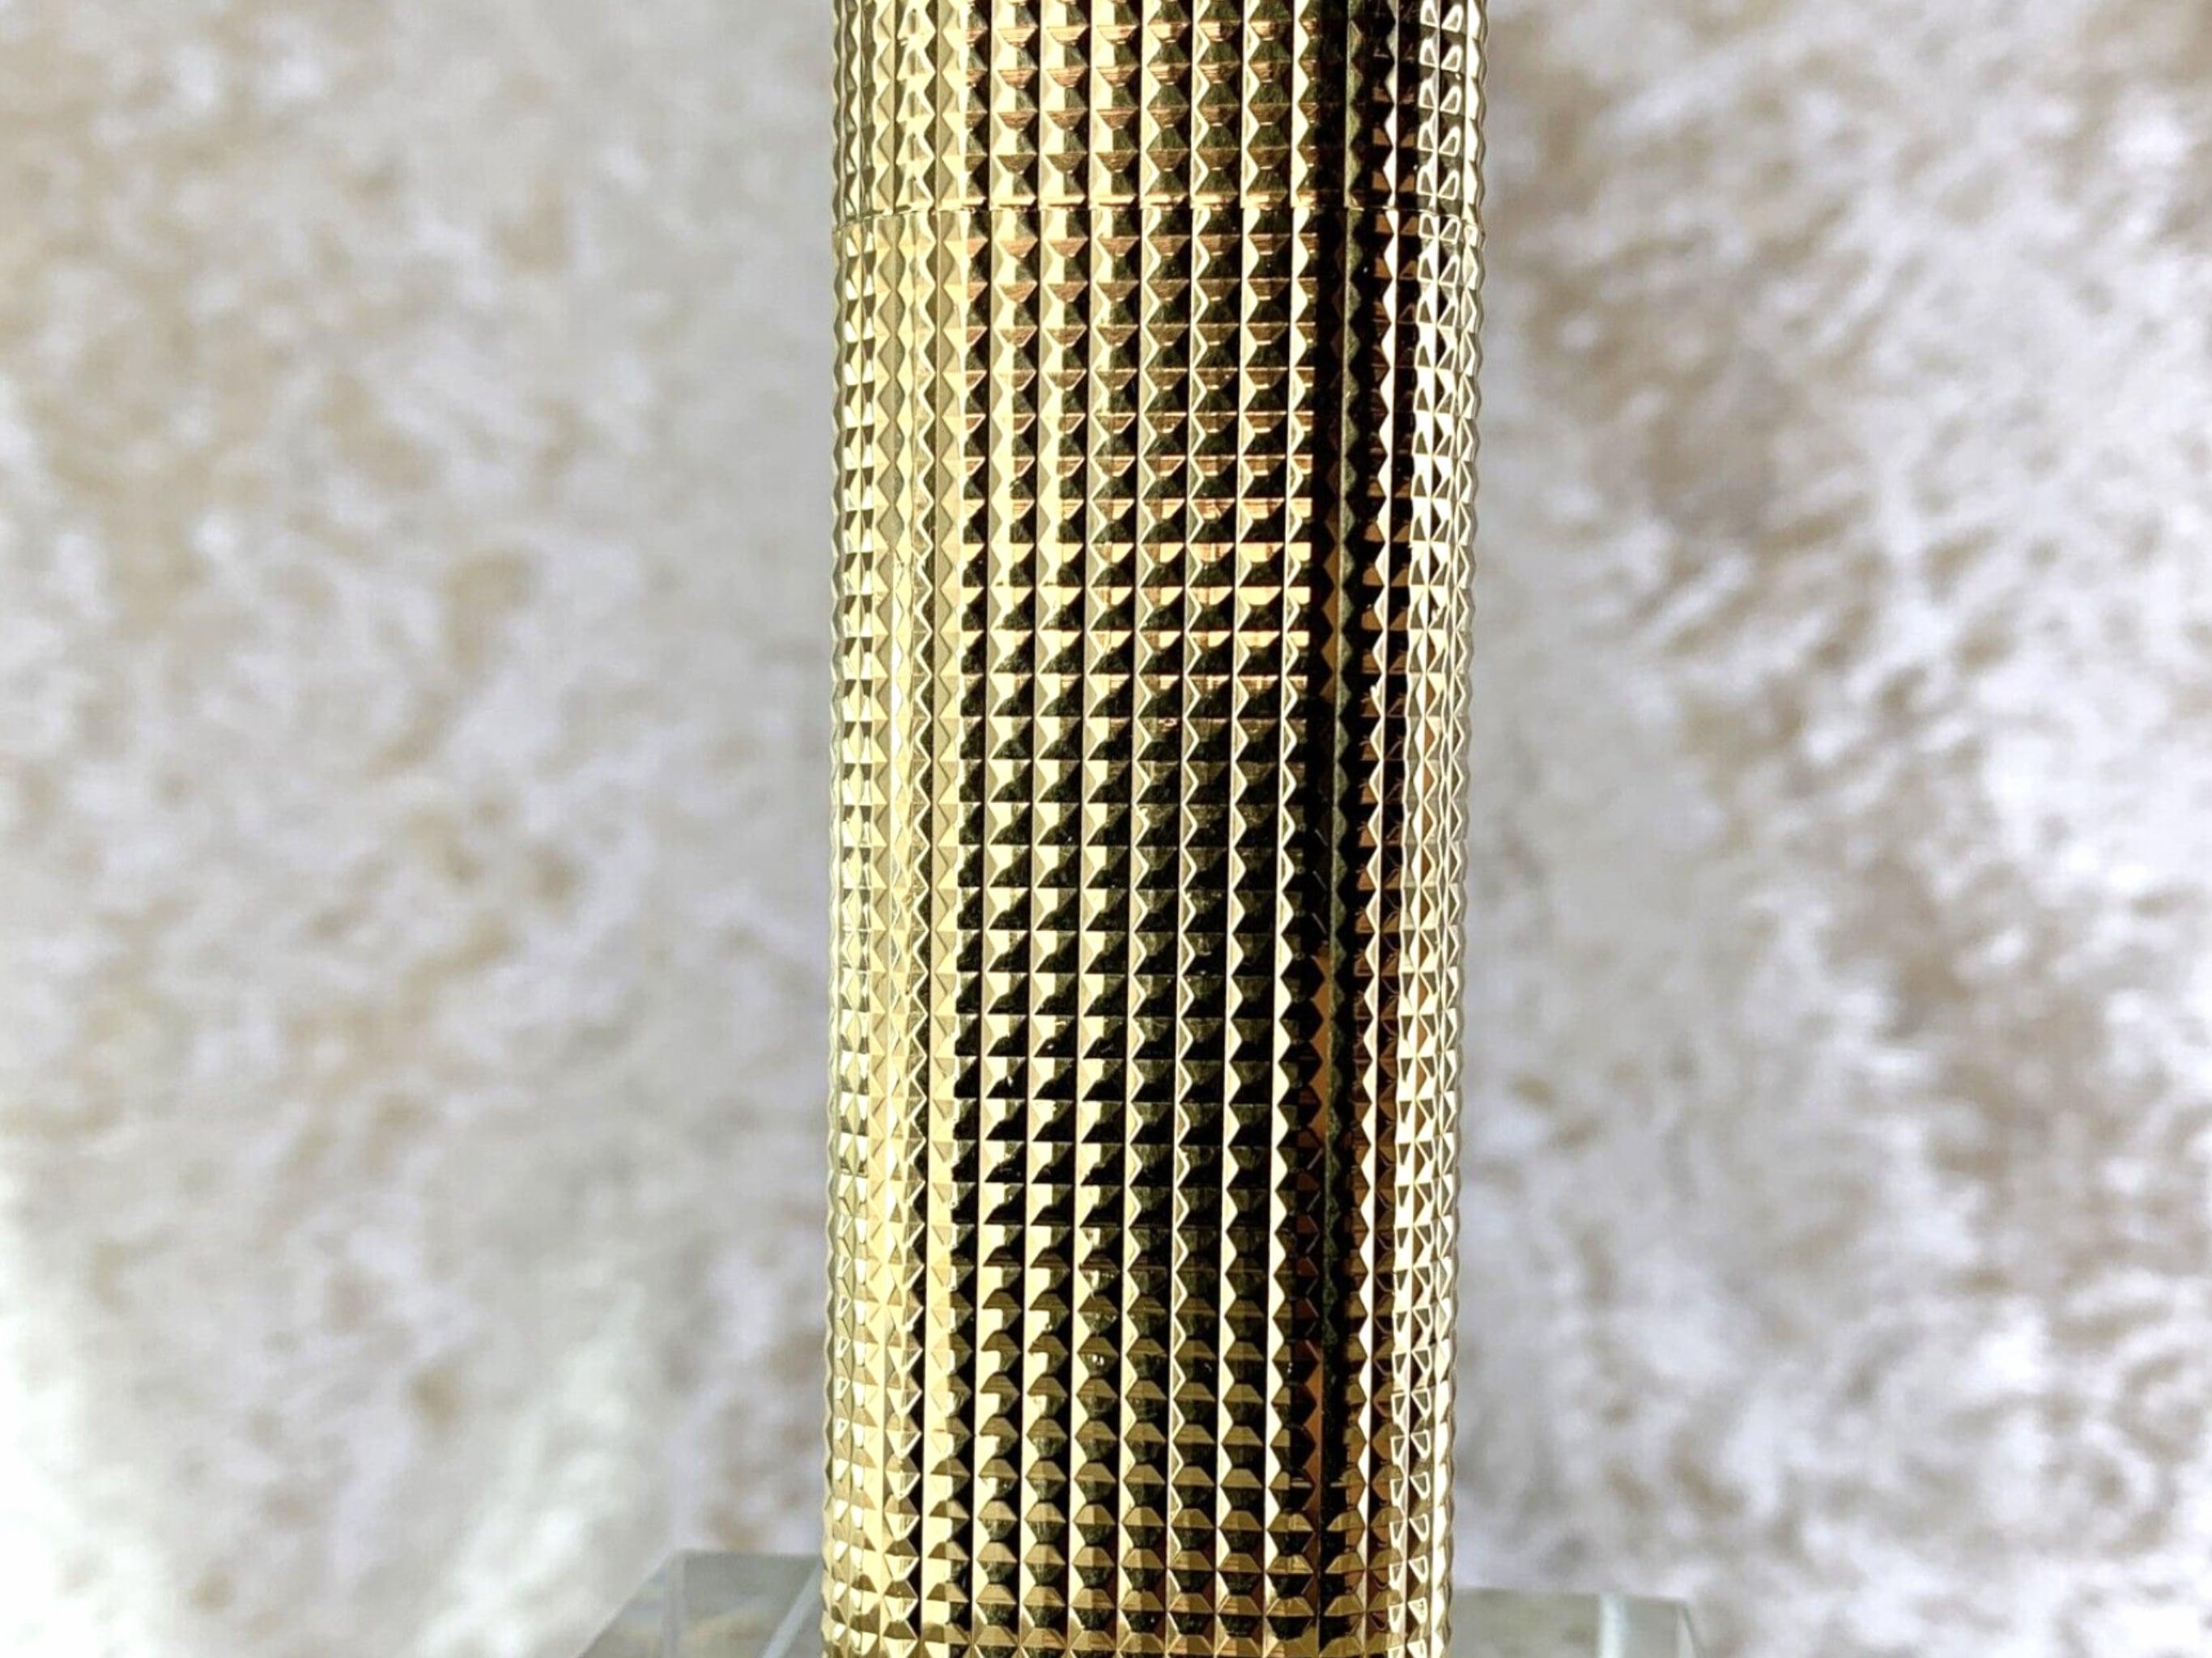 Vintage Cartier Lighter 18K Gold Plated 
Pyramid Cut Texture Model
Excellent working condition 
70 x 25 x 12 mm
Circa 1980s
Comes with original Cartier case 
With original Cartier certificate 
Original papers
The lighter ignites, sparks and flames 